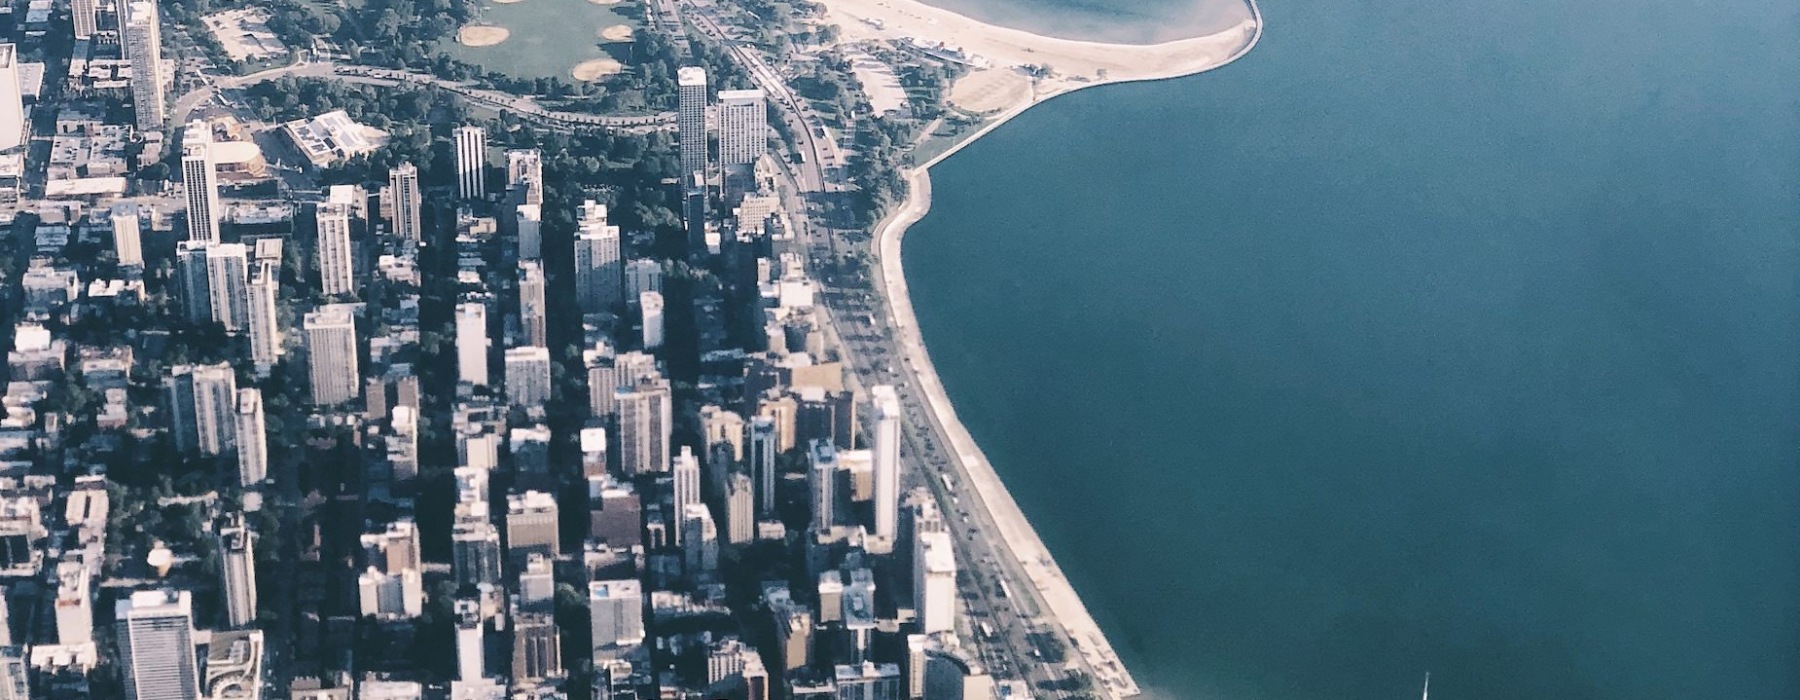 aerial view of uptown chicago